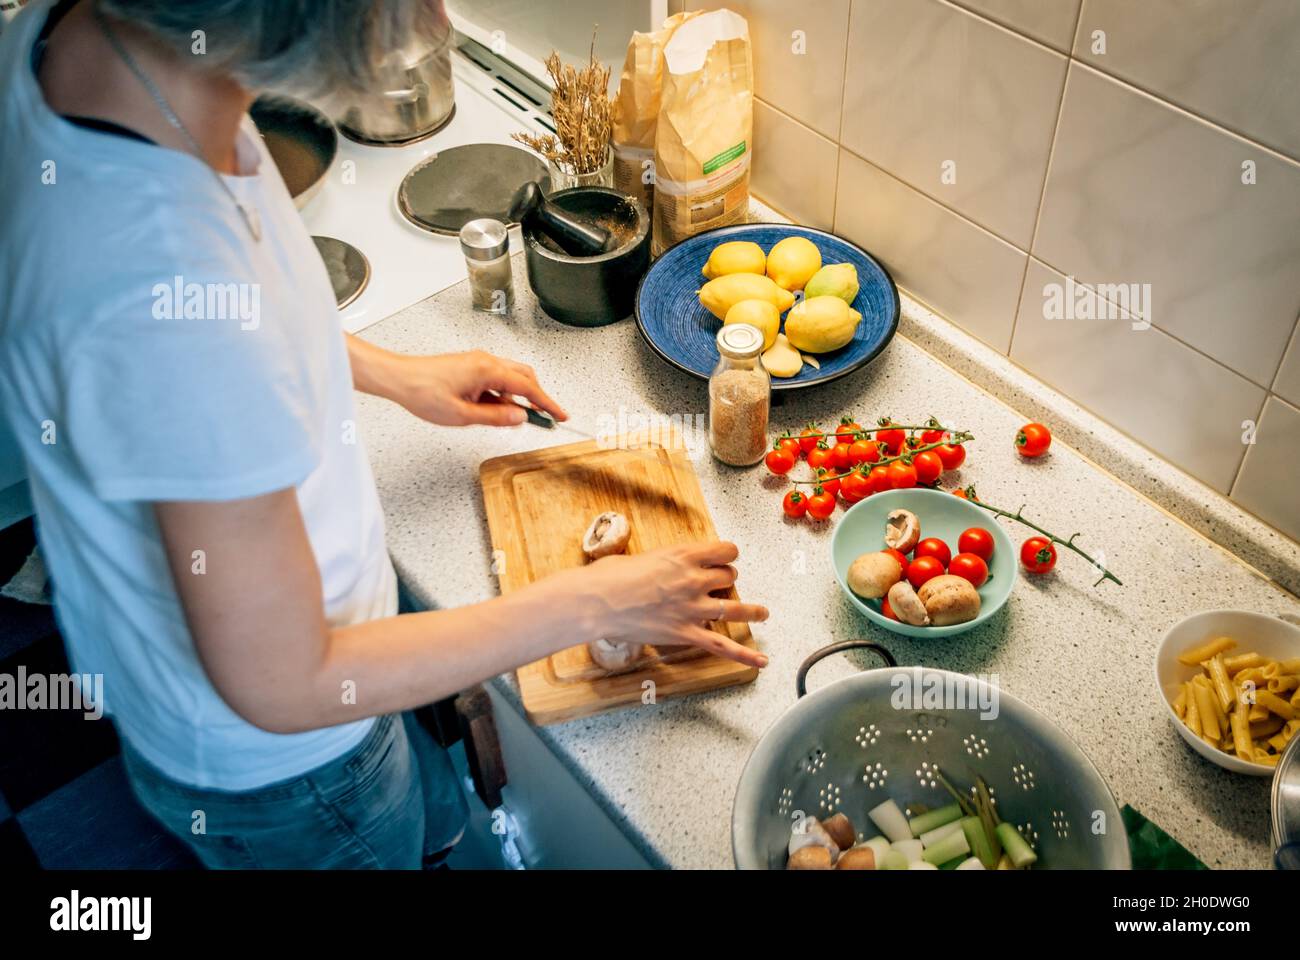 A woman cooks dinner in the kitchen of the house, top view Stock Photo